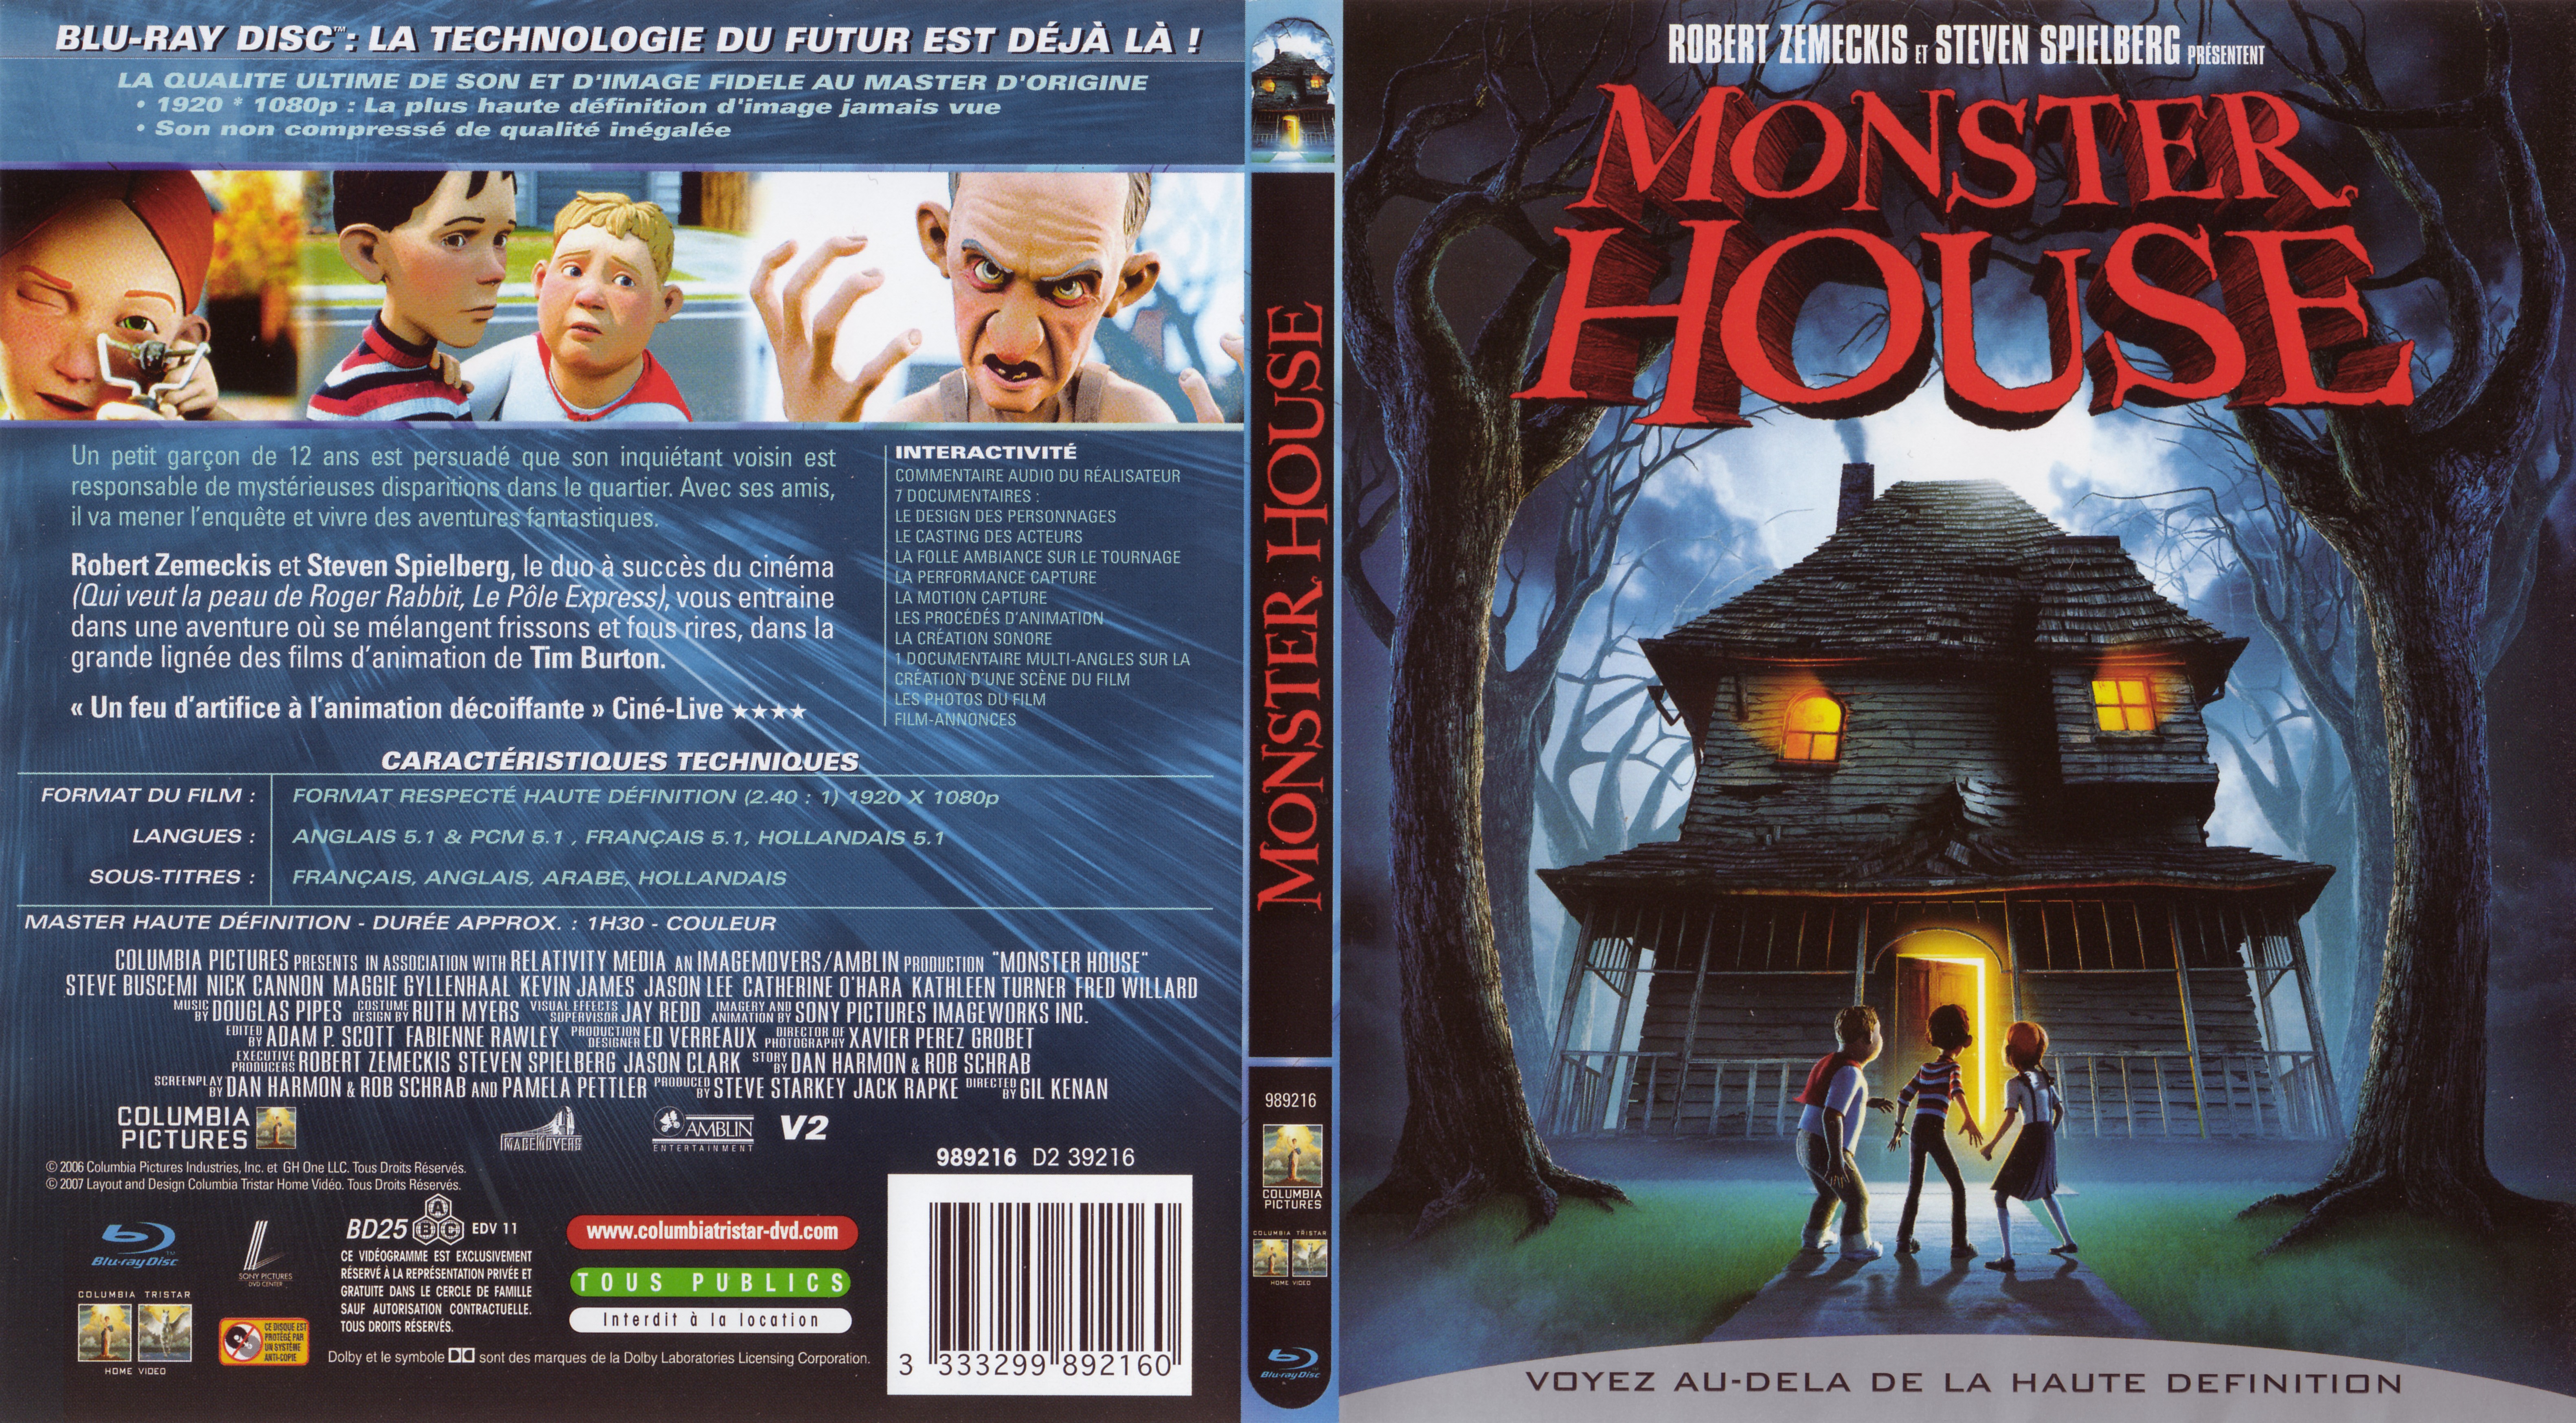 Jaquette DVD Monster house (BLU-RAY)